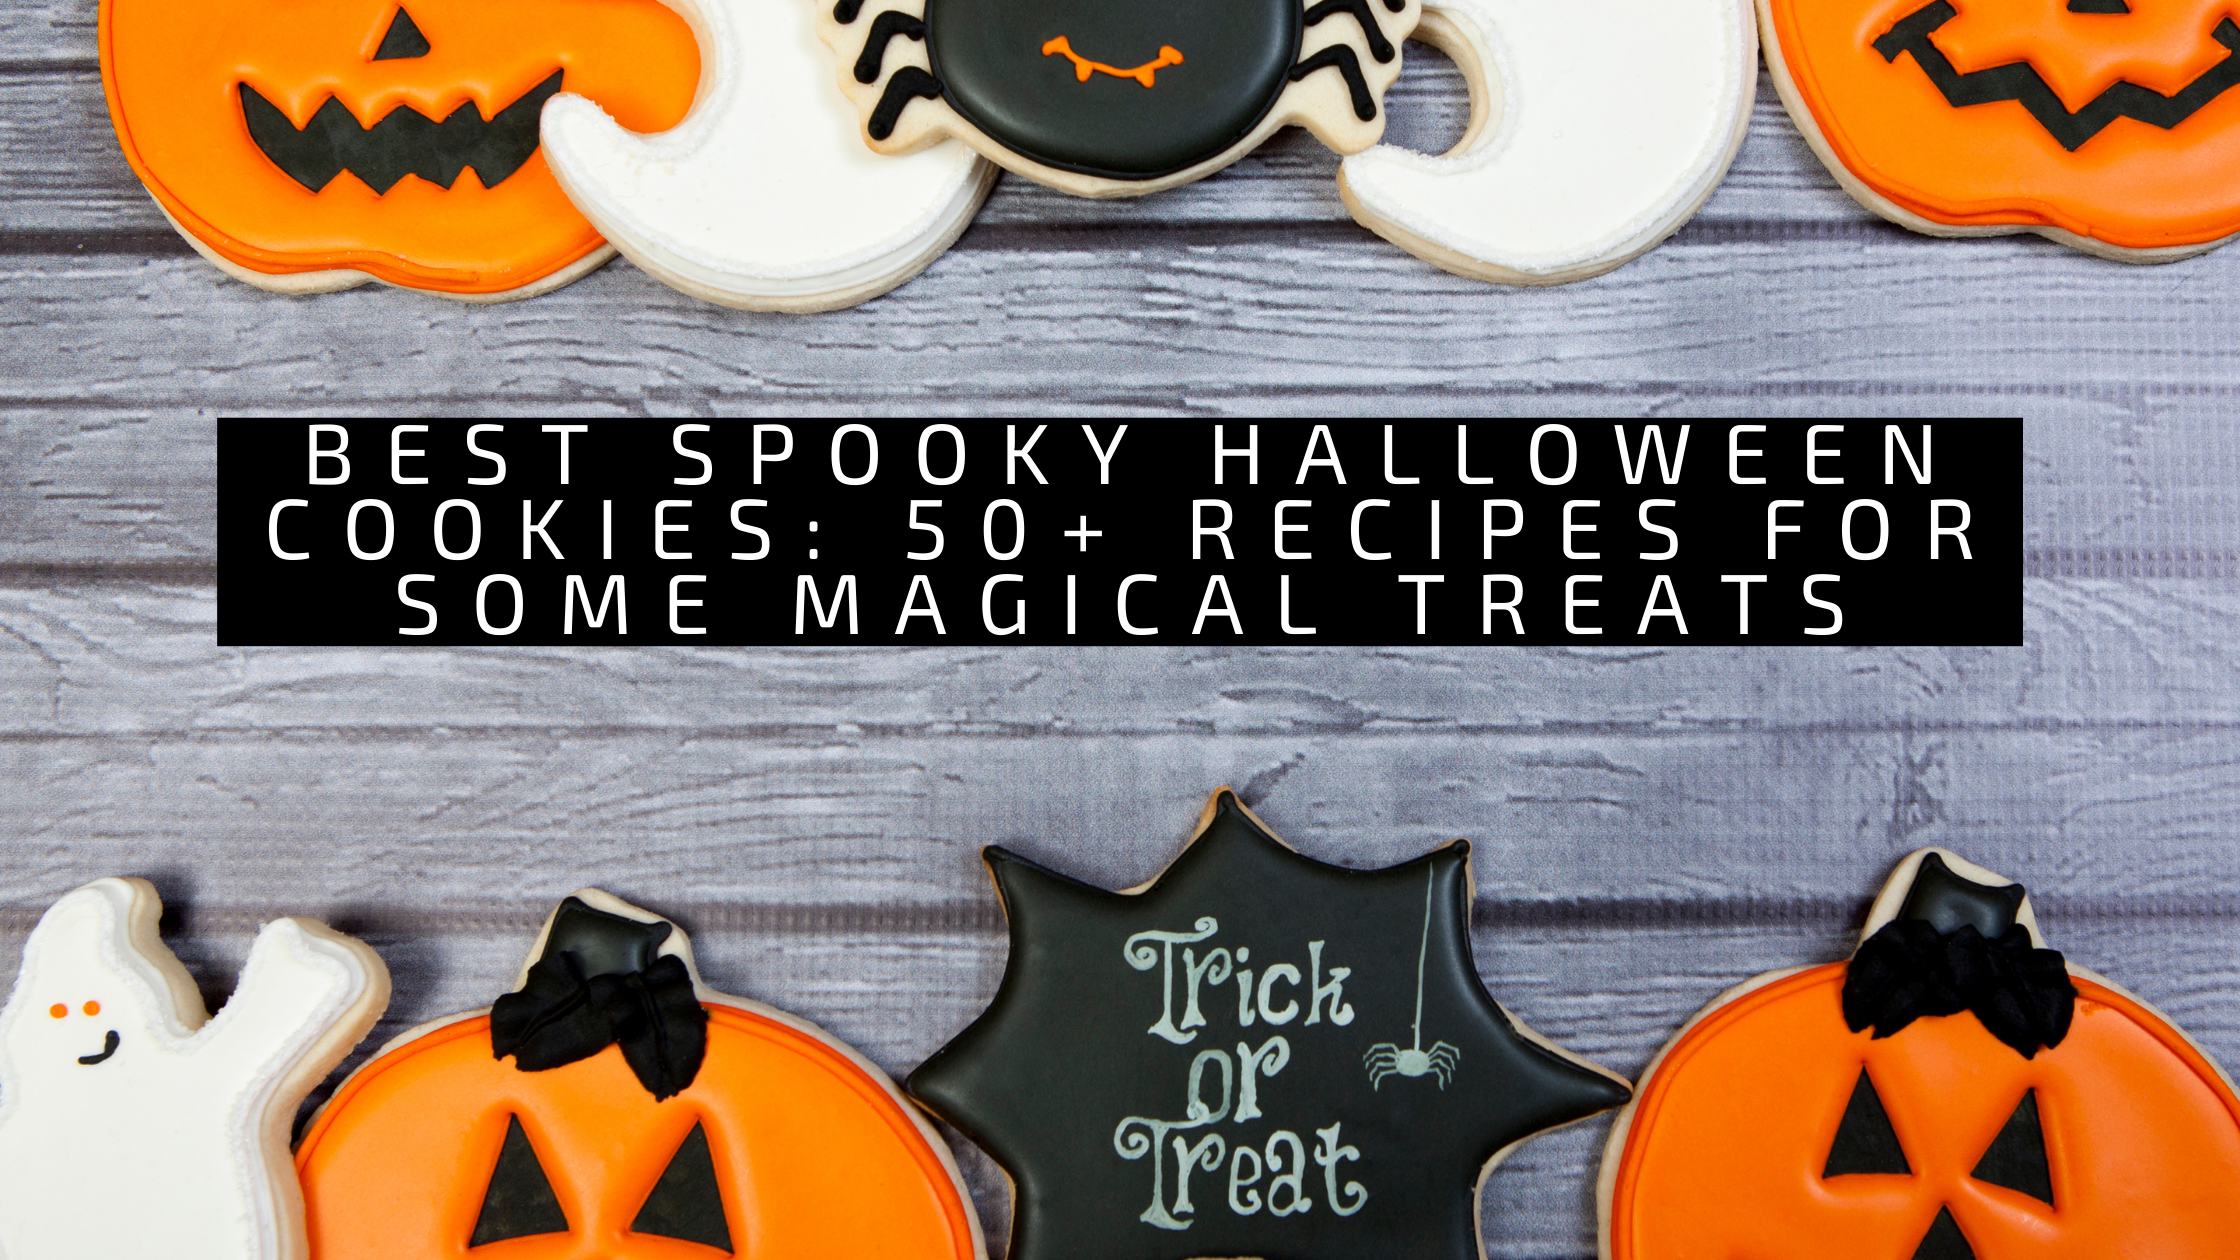 Best Spooky Halloween Cookies: 50+ Recipes for Some Magical Treats 11